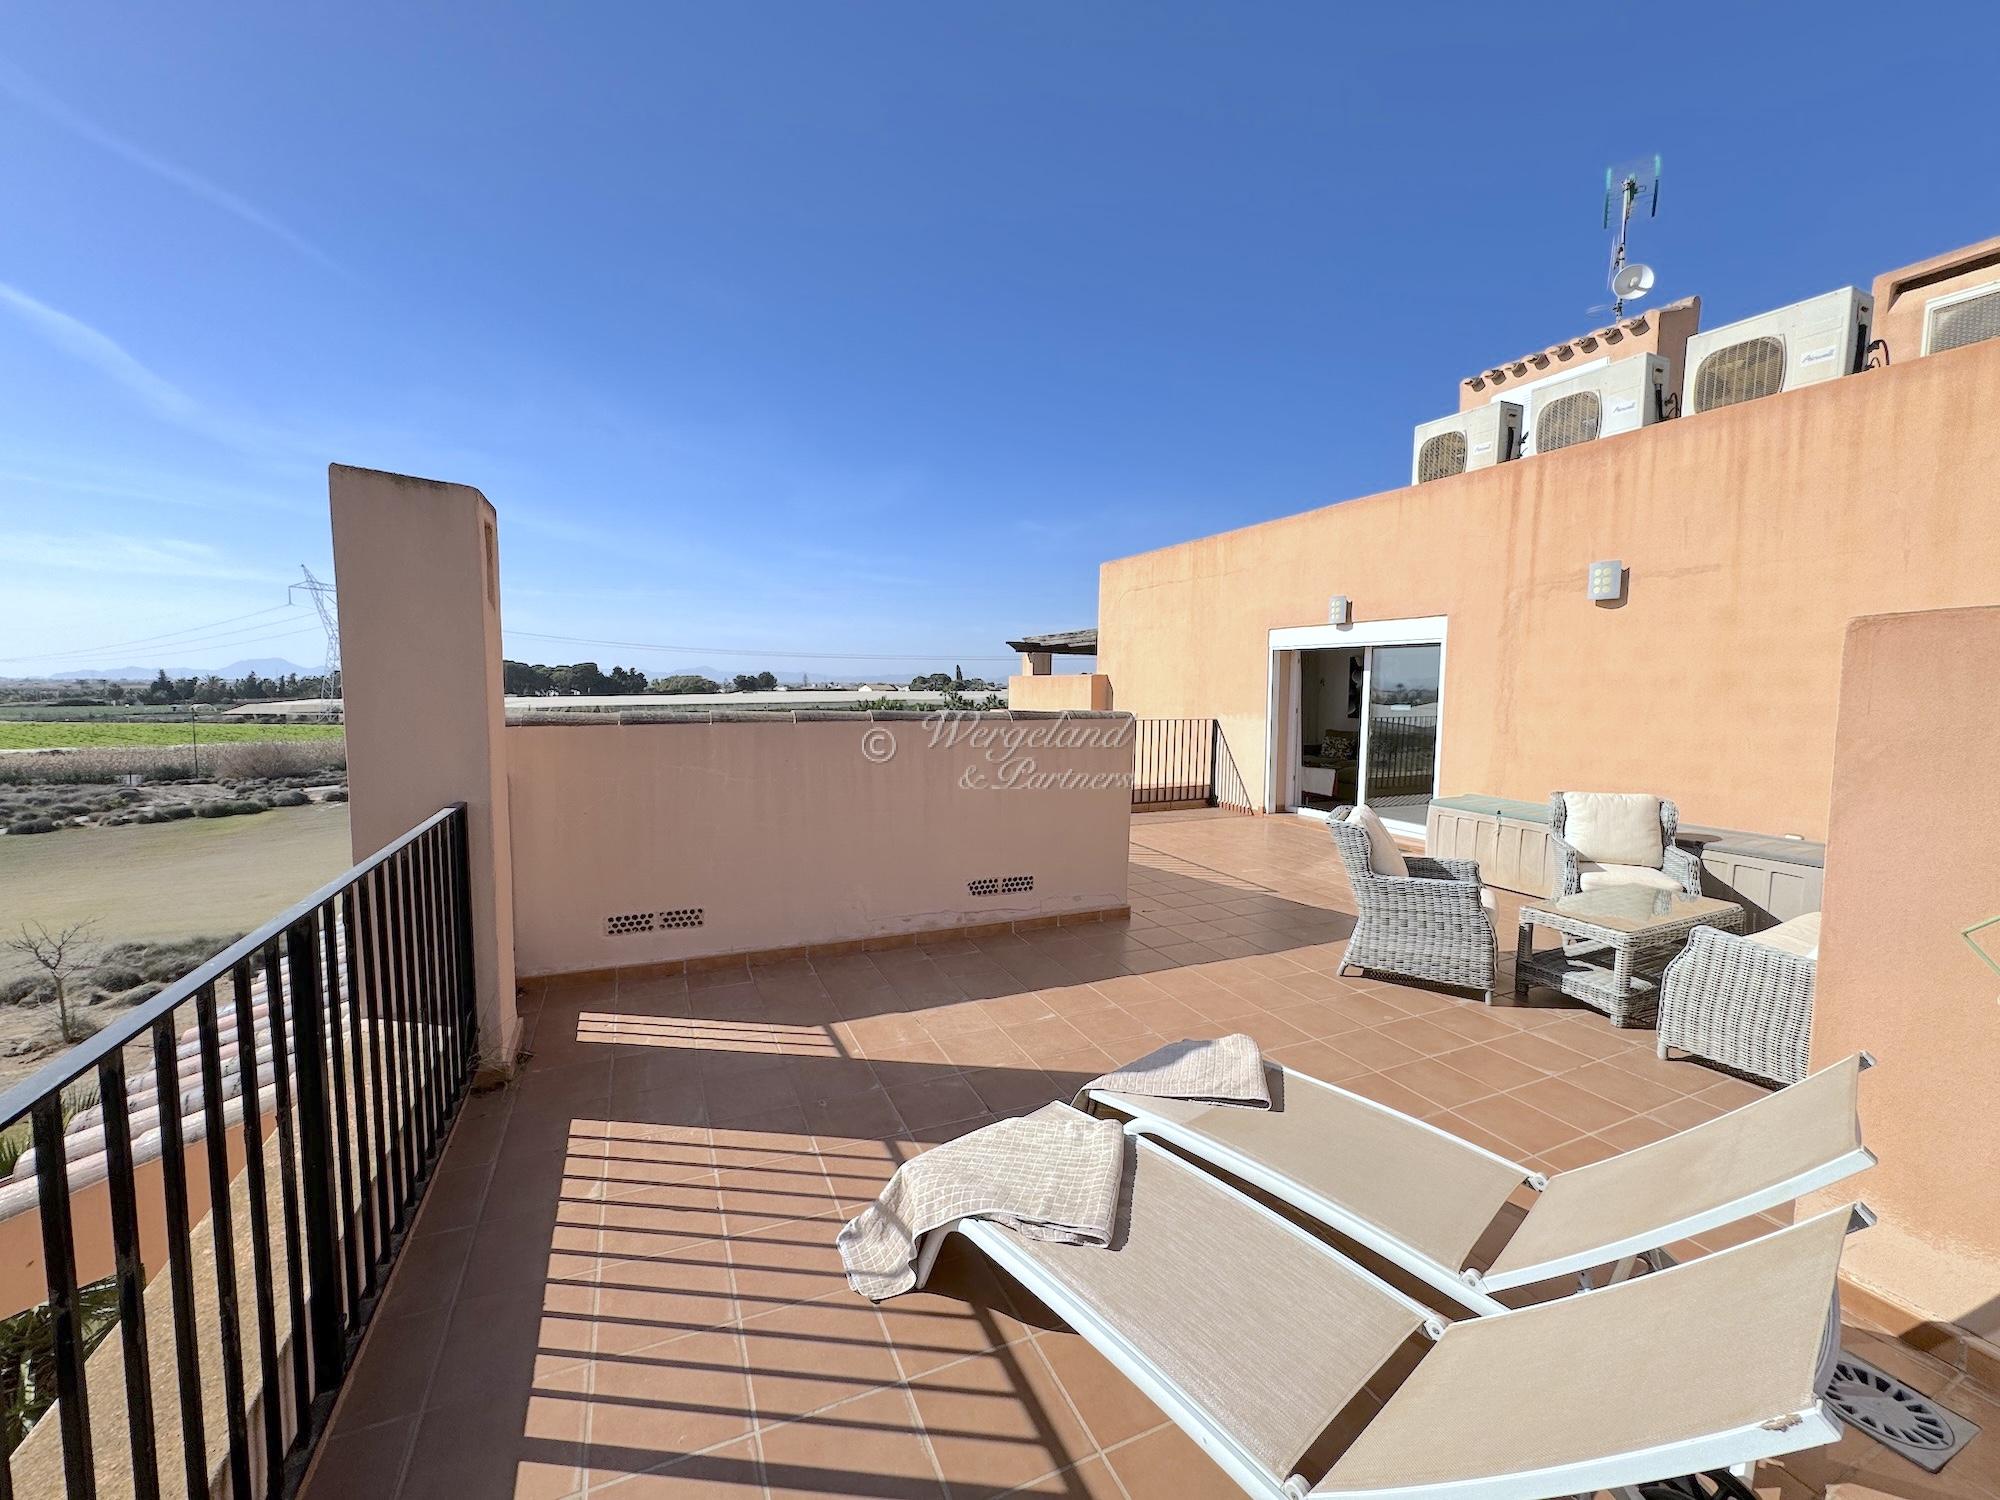 Furnished Penthouse, 68 m2 terraces, 1. line golf, furnished, garage with storage [1132]